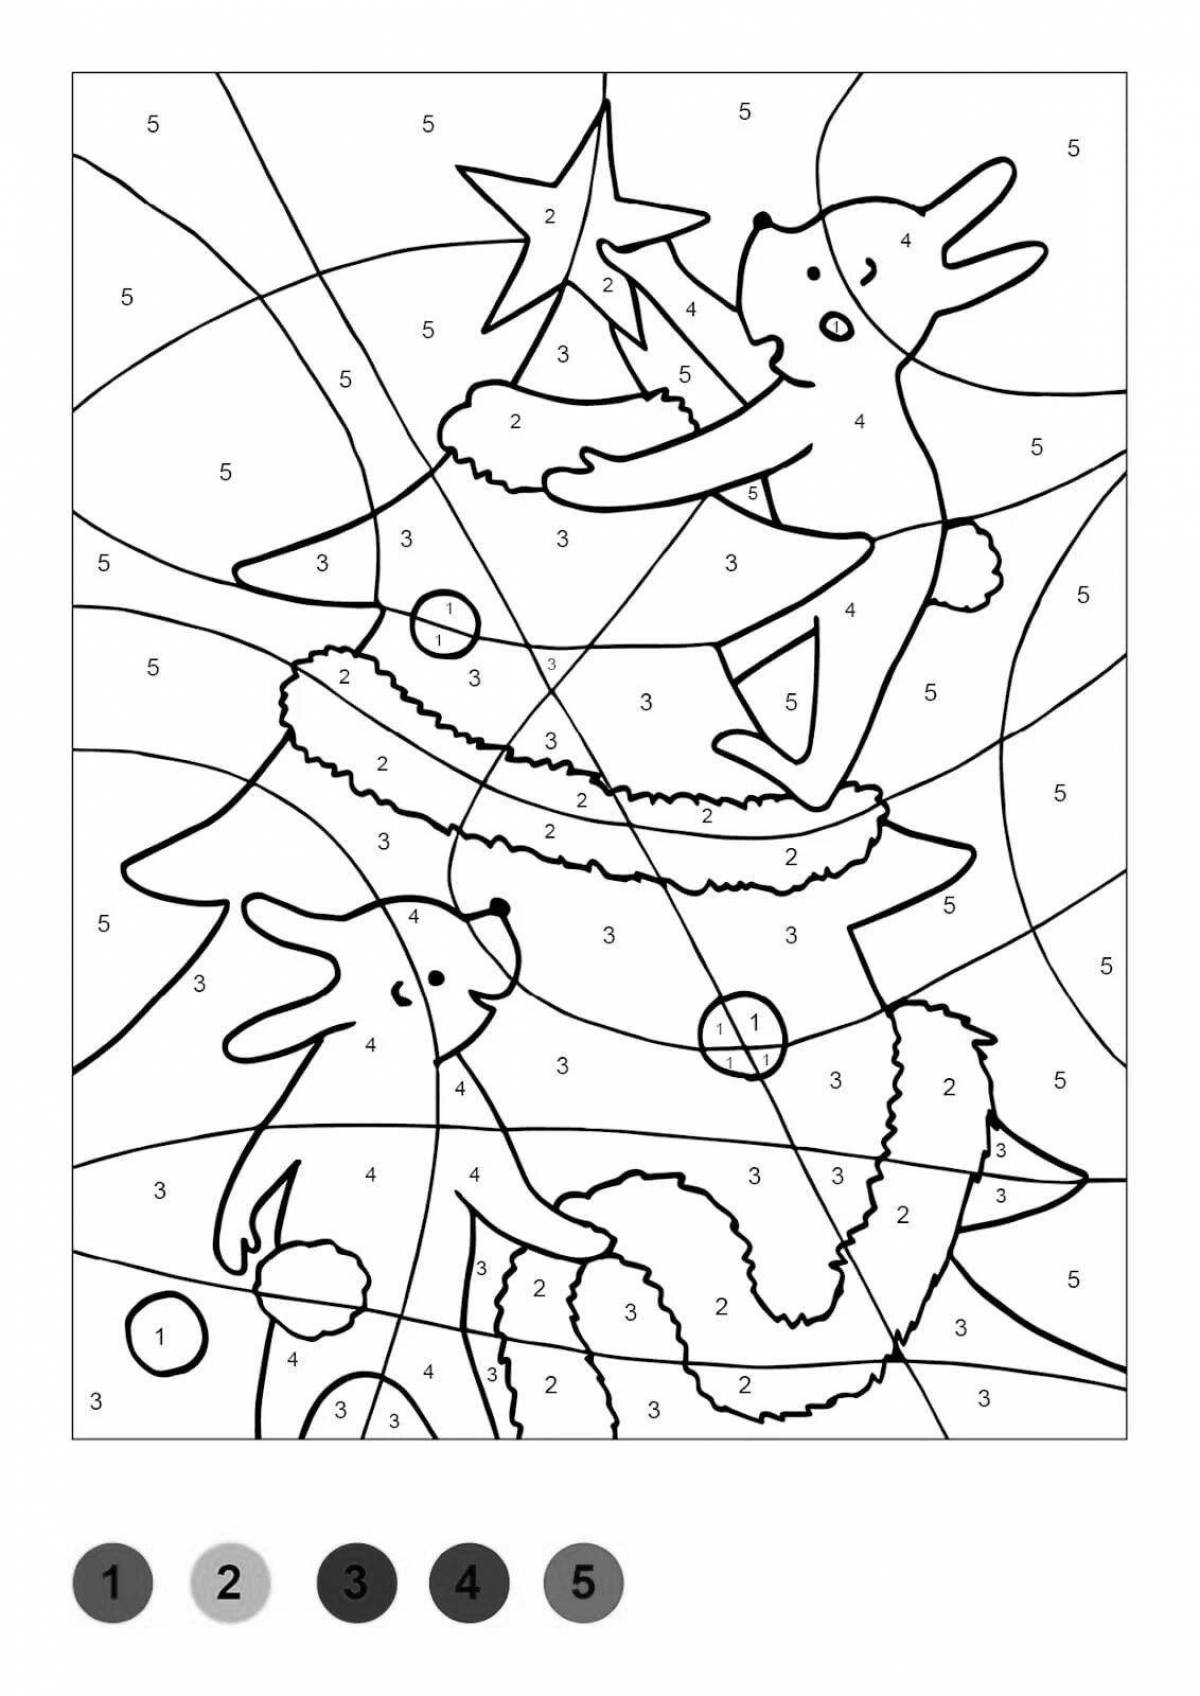 Fun winter coloring by numbers